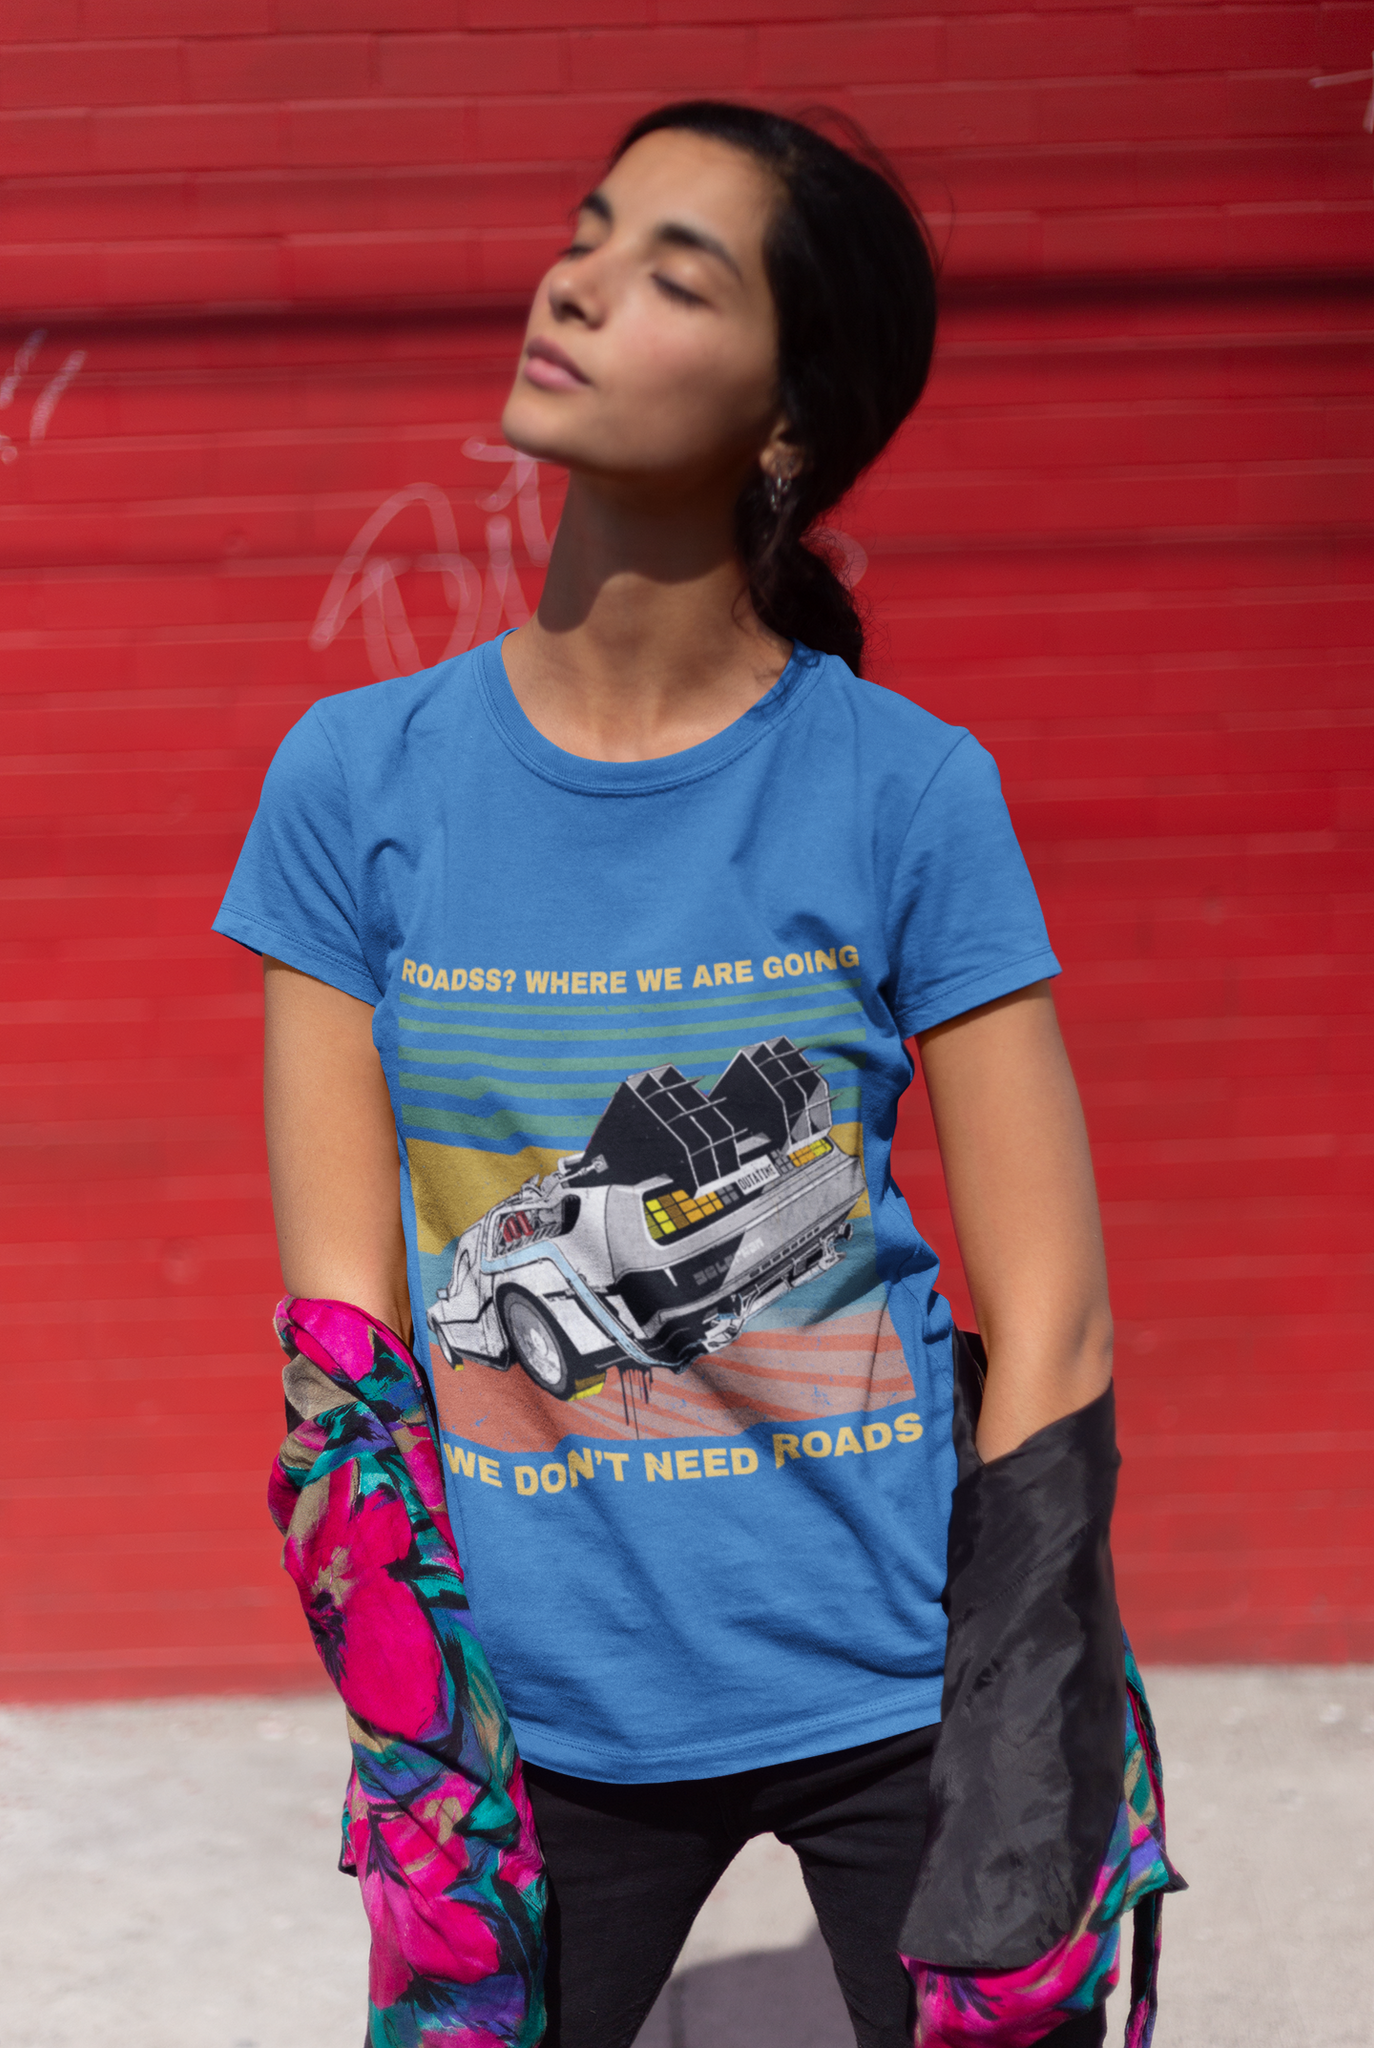 Back To The Future T Shirt, Roads Where We Going We Dont Need Roads Tshirt, Delorean Time Machine T Shirt